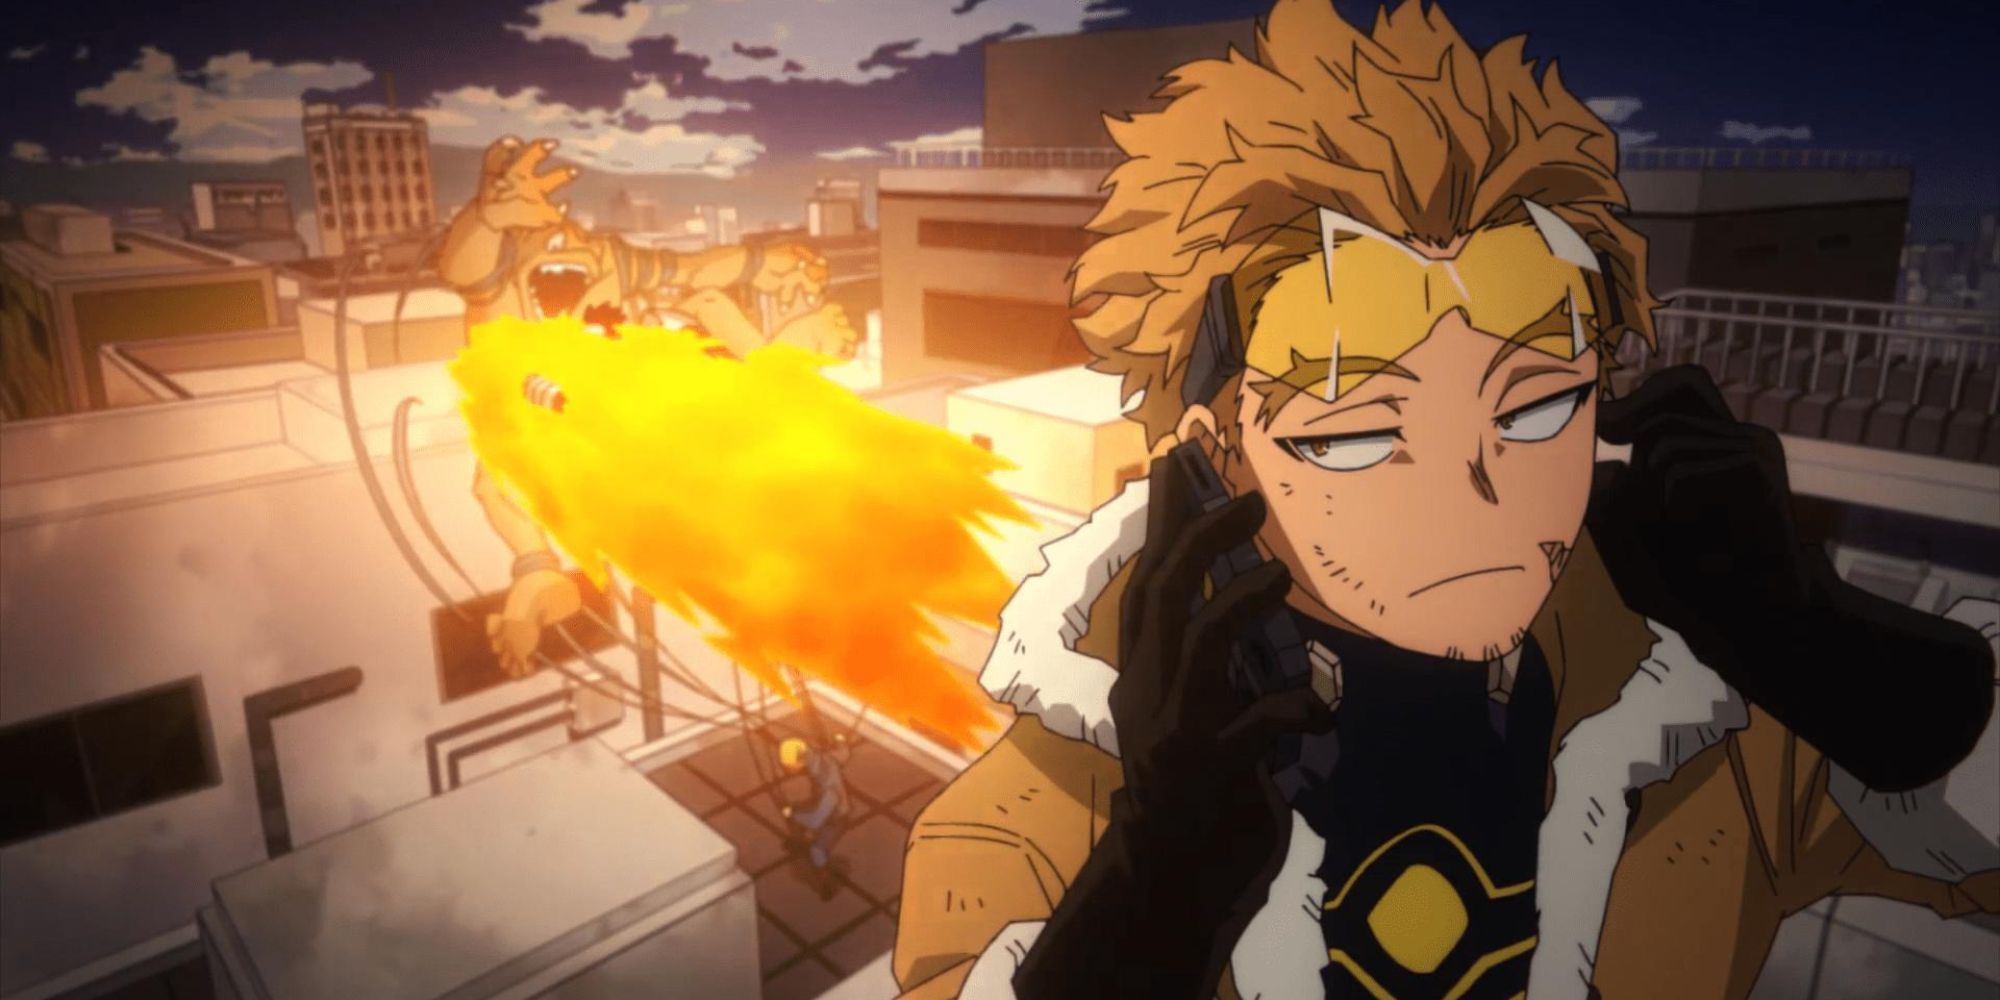 My Hero Academia Season 6 Episode 10 Release Date and Time on